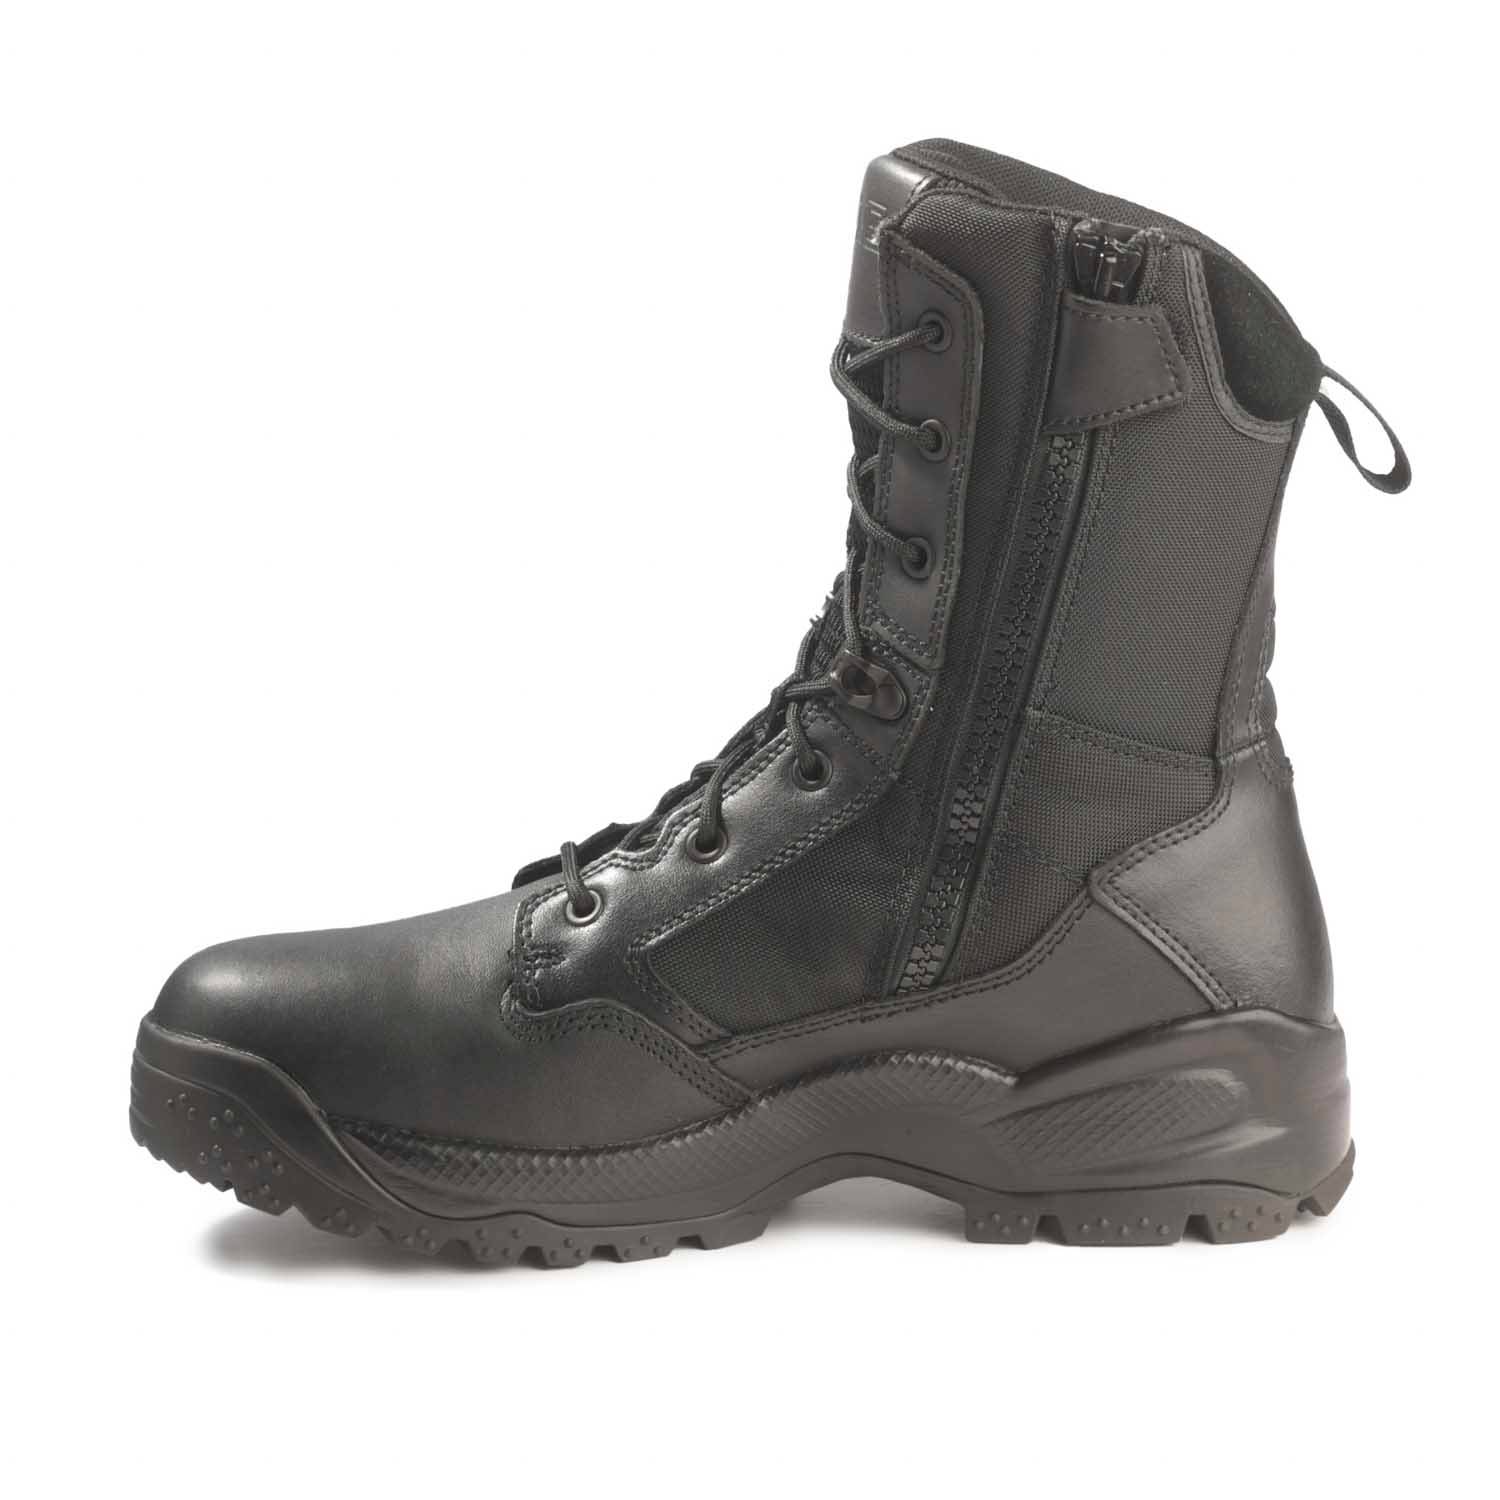 Style 12391 5.11 Tactical Mens ATAC 2.0 8 Leather Black Combat Military Side Zip Boots